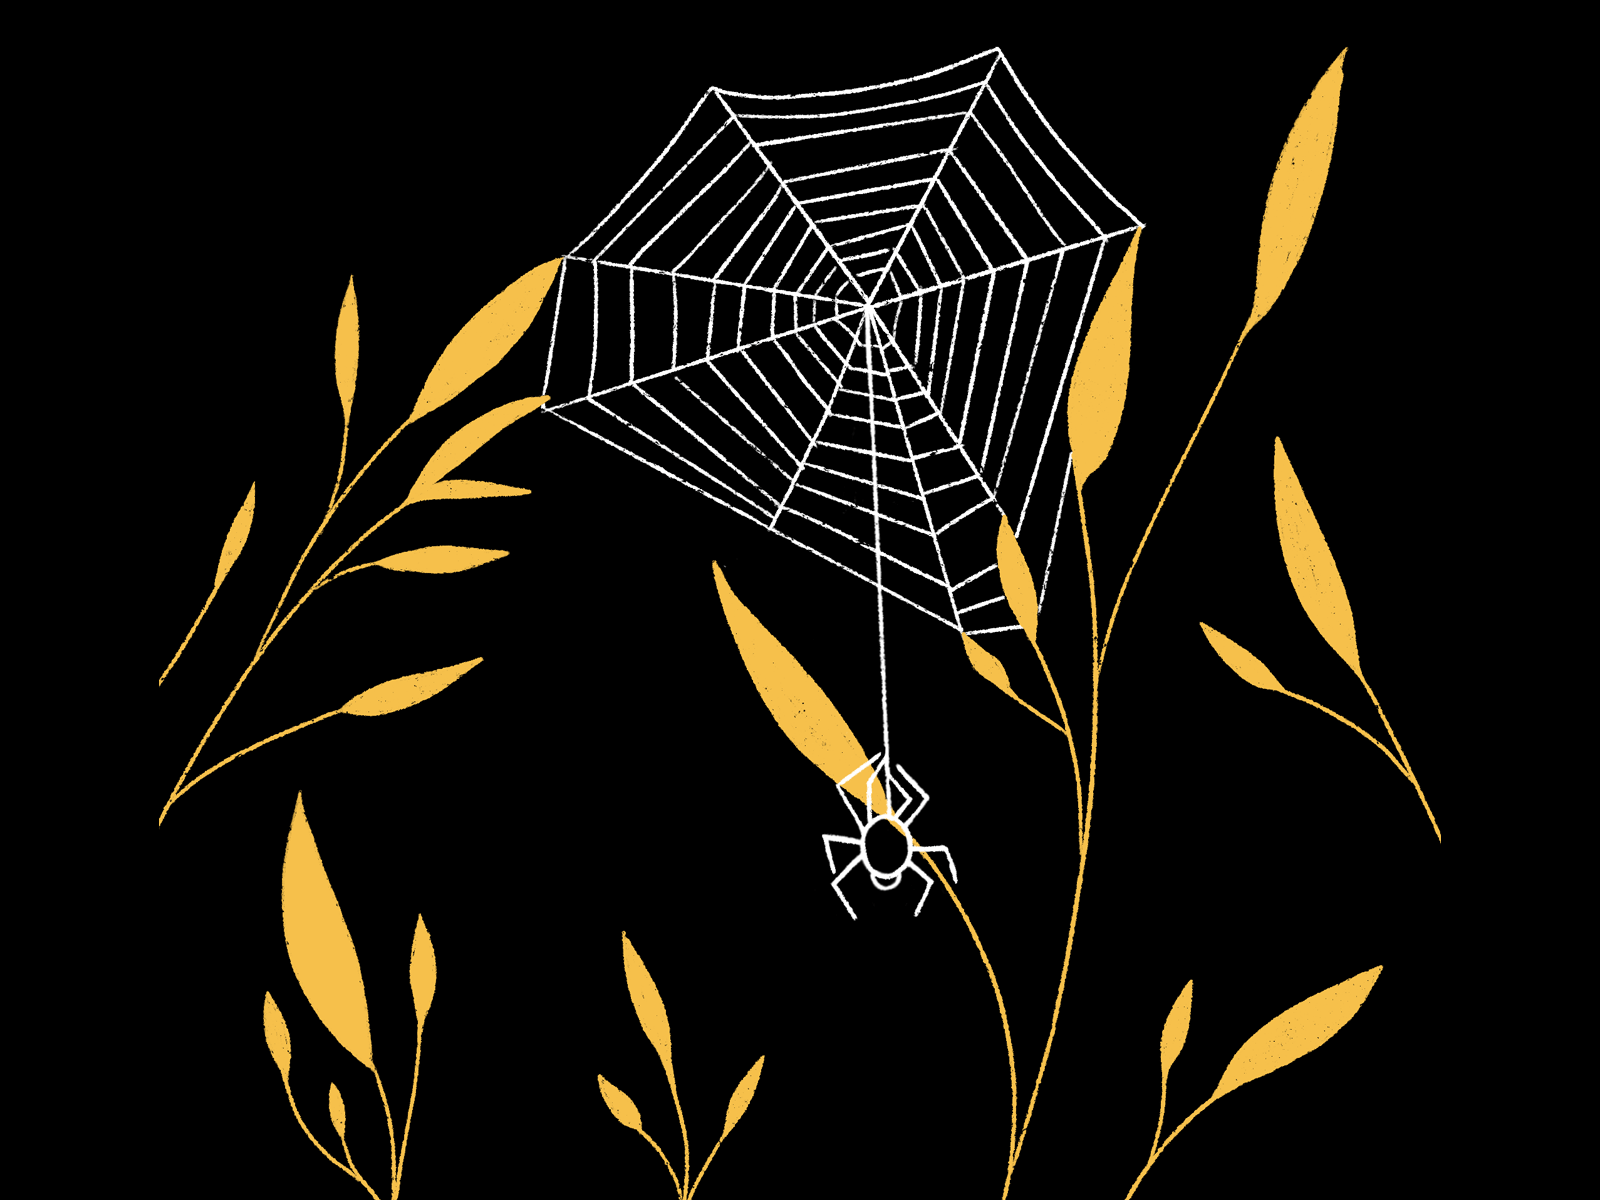 Frail/Swing 2d animation animation animation 2d drawing frail gif inktober inktober2019 ipad pro leaves procreate sketch spider spiderweb swing web